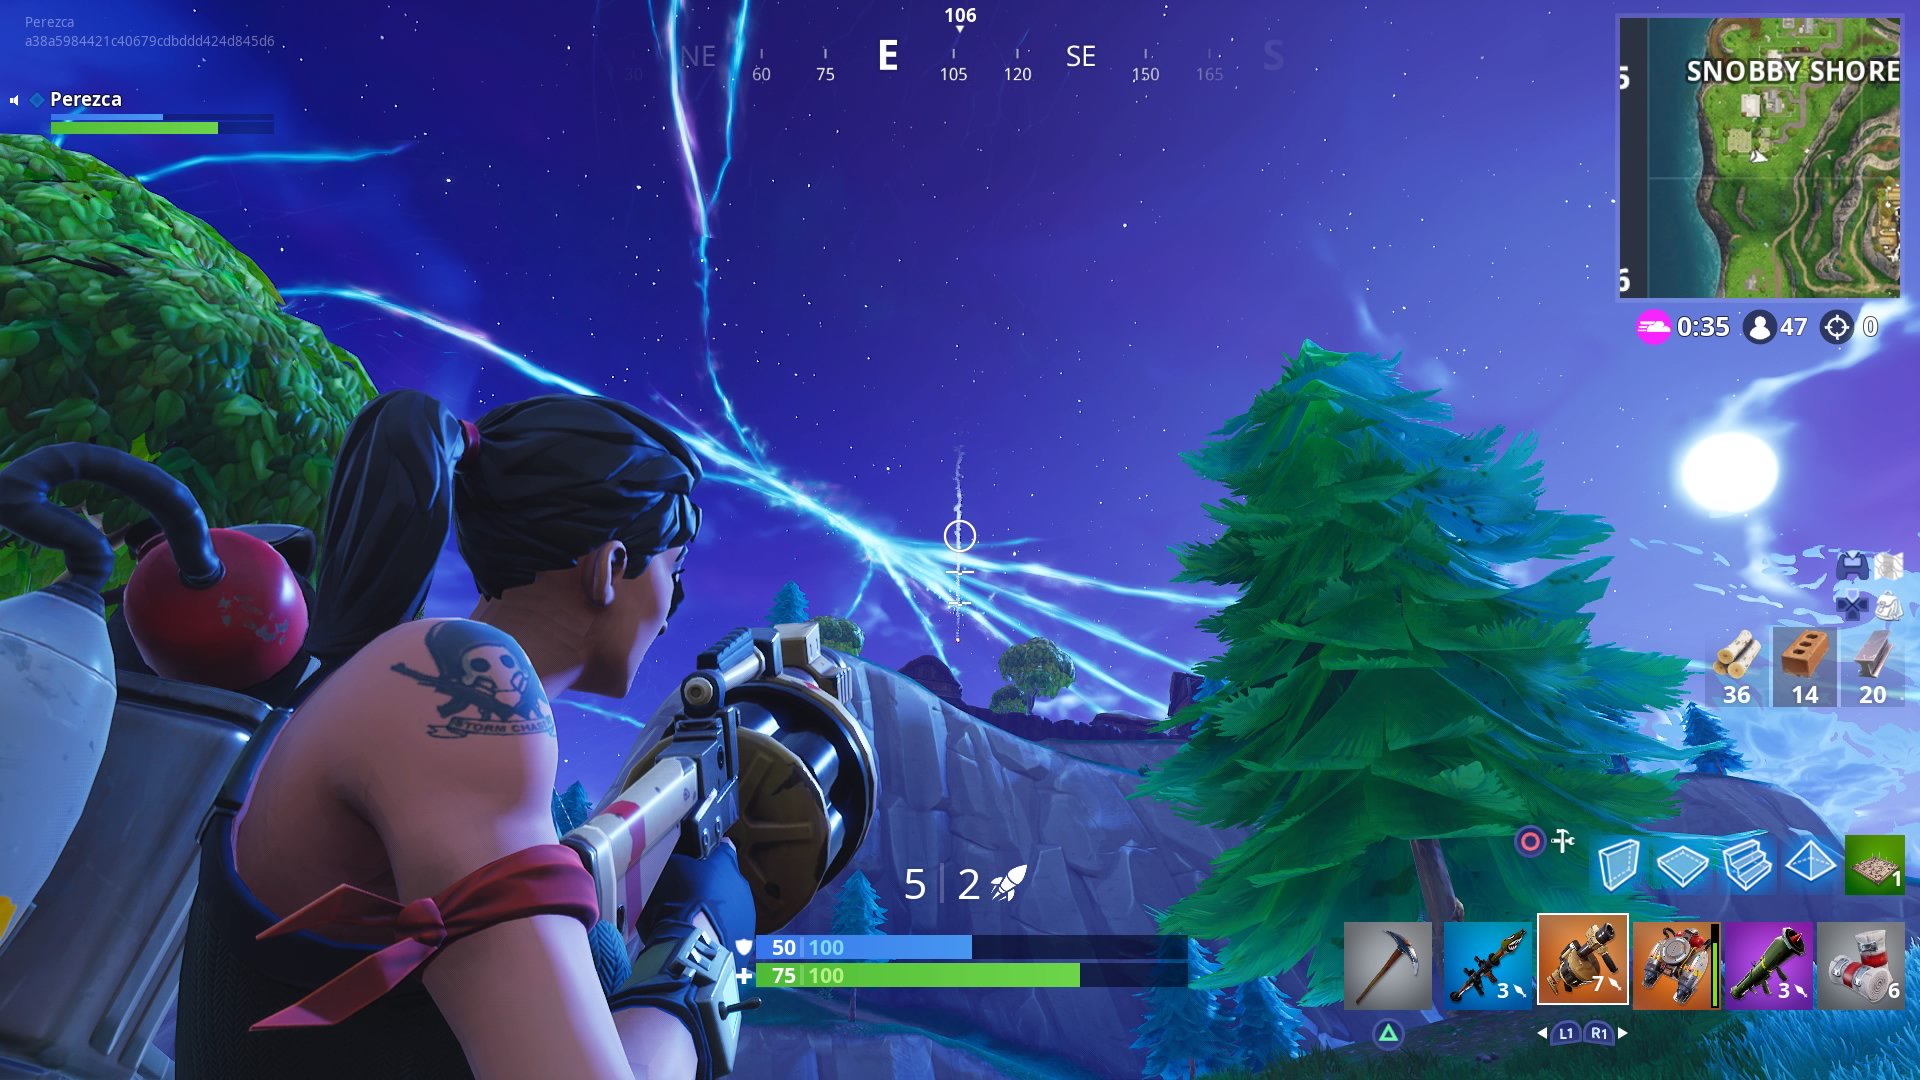 Fortnite Mobile UPDATE - PS4 and Xbox One cross-play BOOST, Gaming, Entertainment